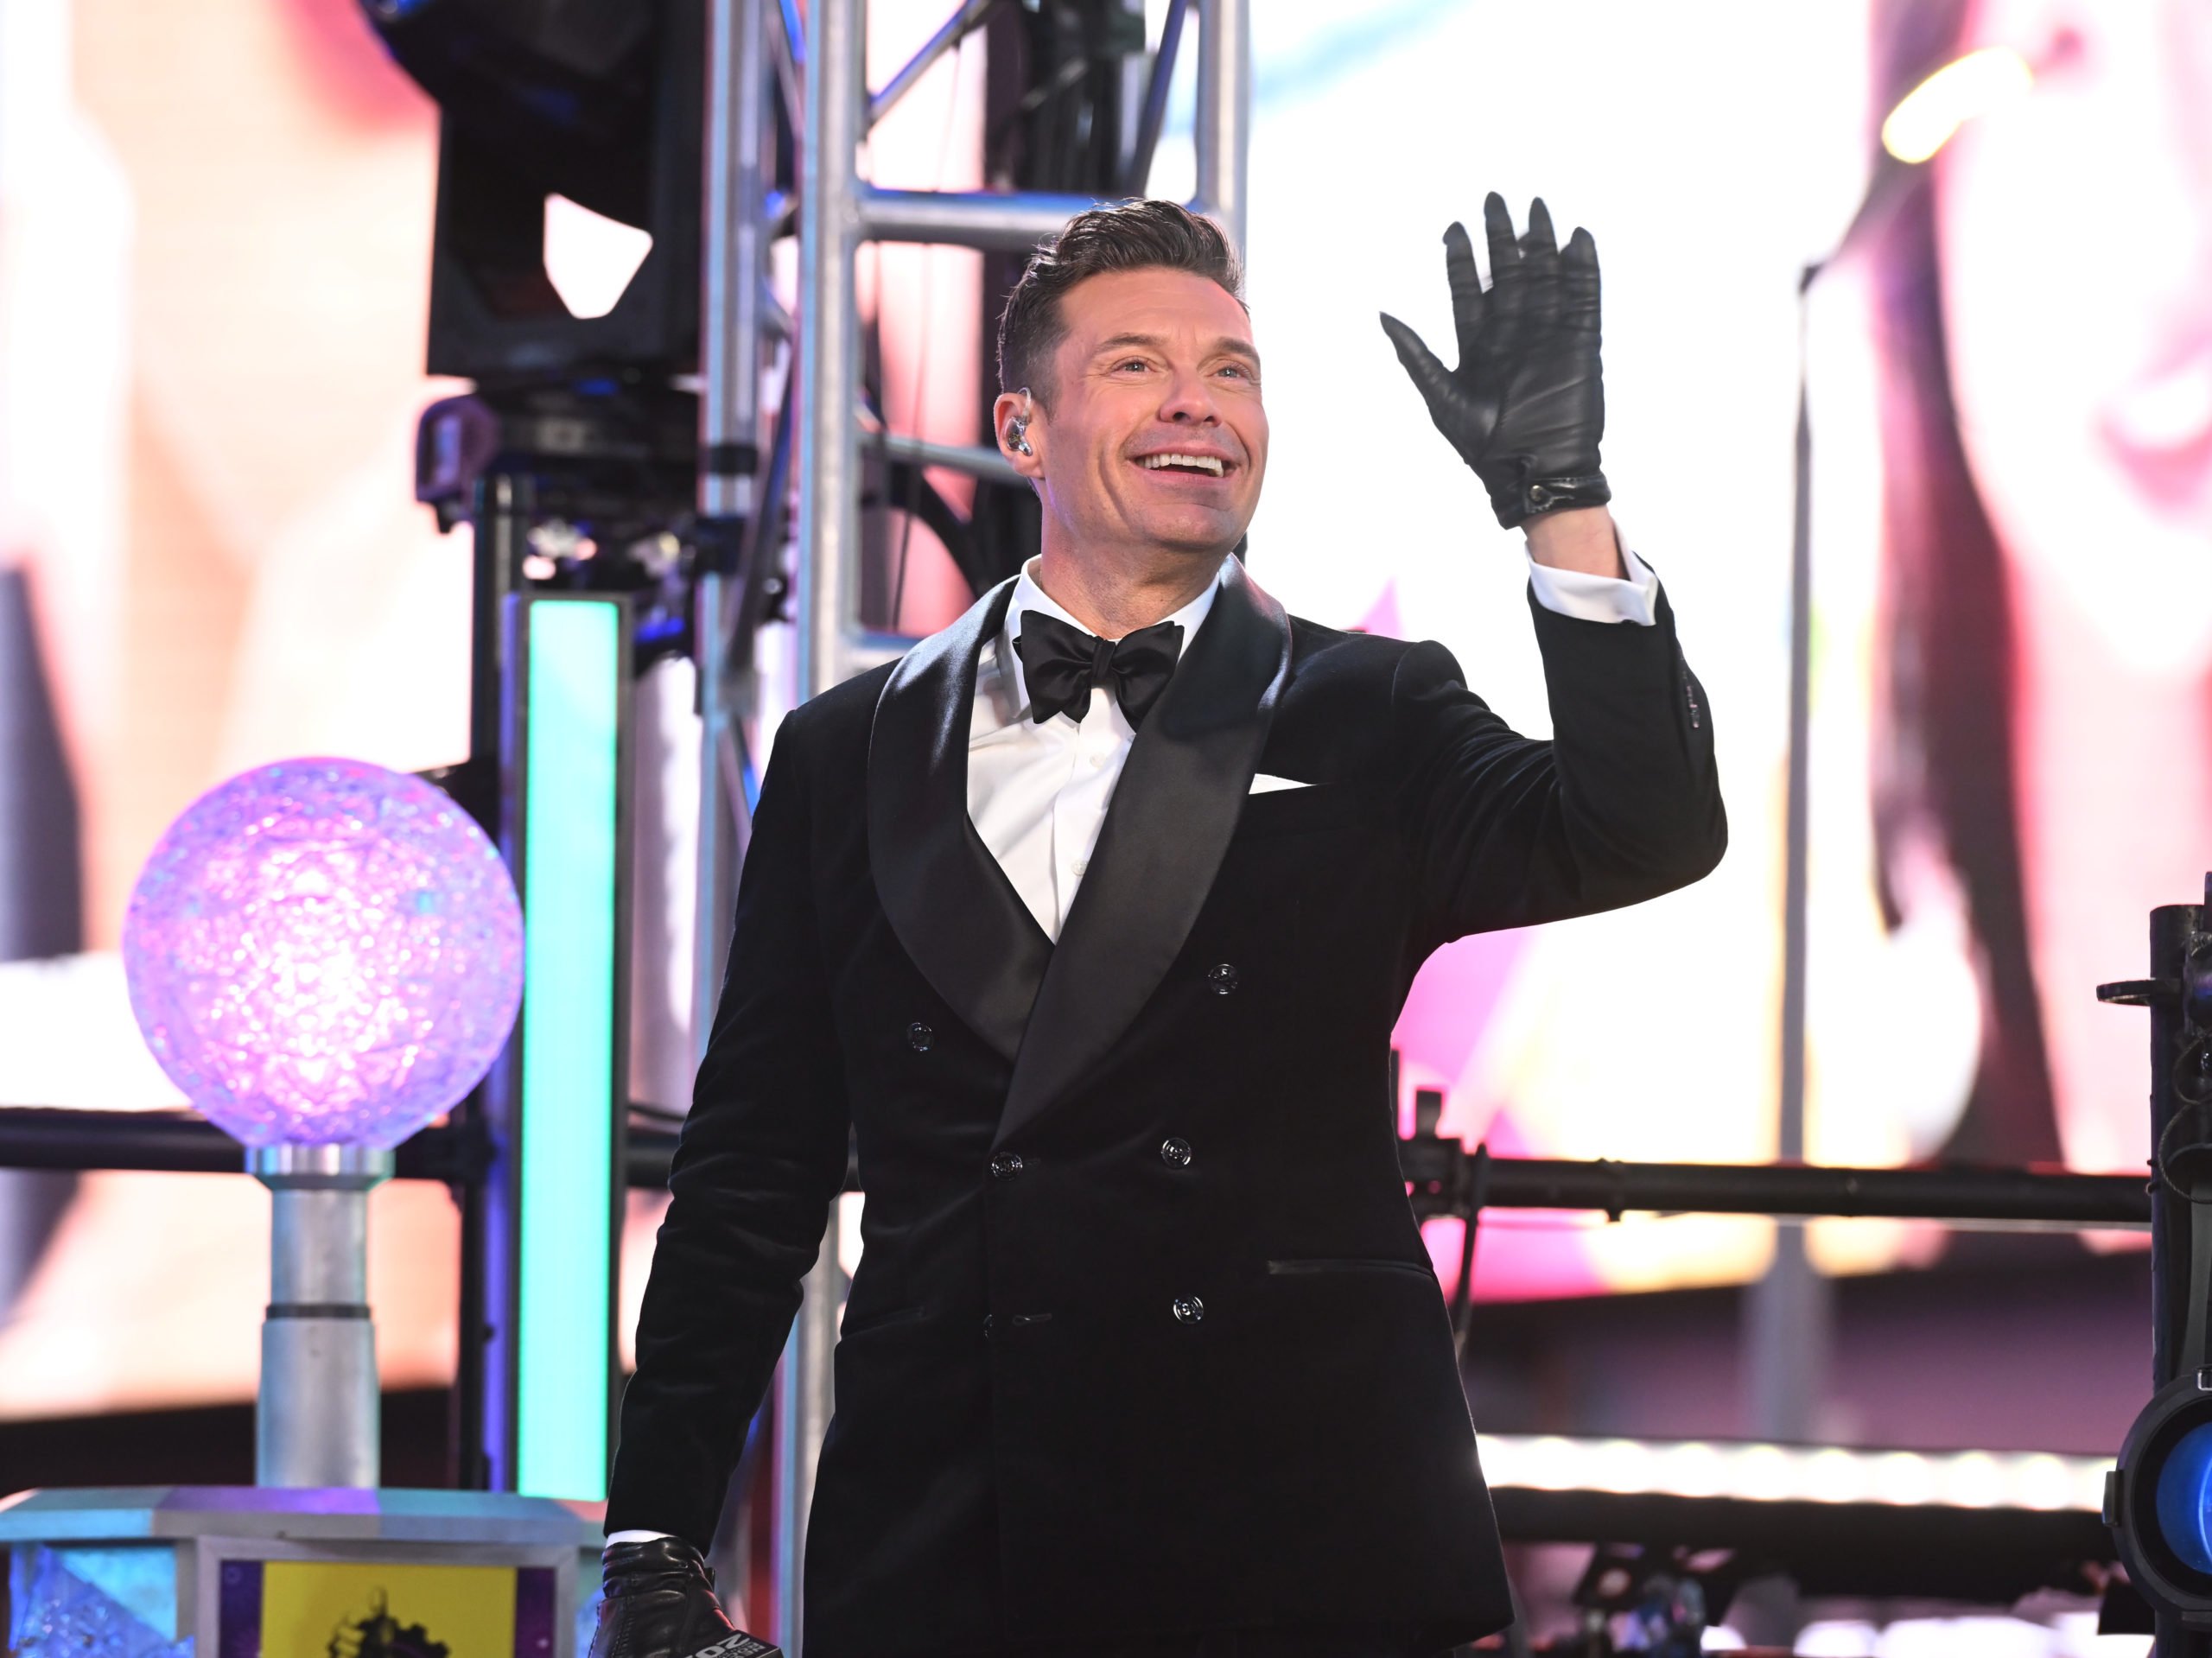 NEW YORK, NEW YORK - DECEMBER 31: Ryan Seacrest speaks onstage at the Times Square New Year's Eve 2024 Celebration on December 31, 2023 in New York City. (Photo by Noam Galai/Getty Images)